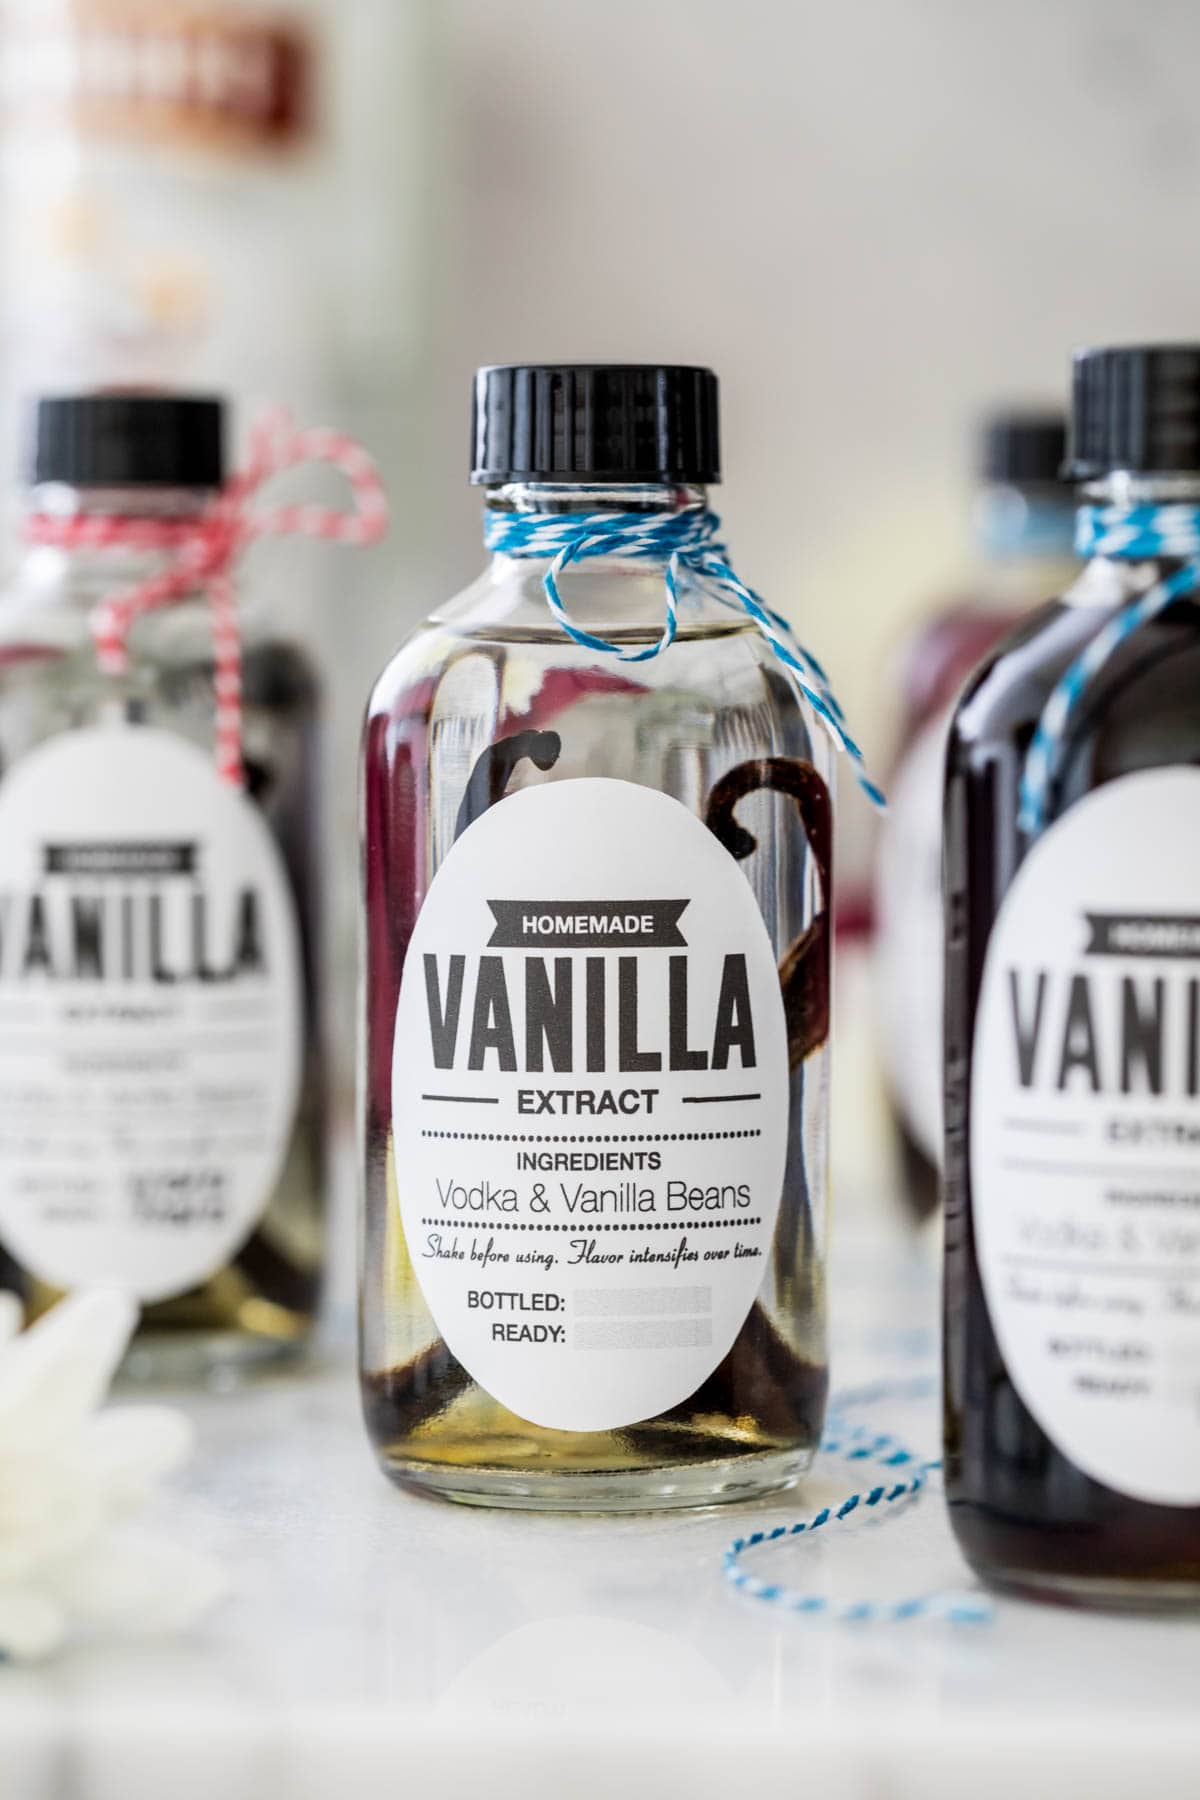 Bottle of extract showing vanilla beans